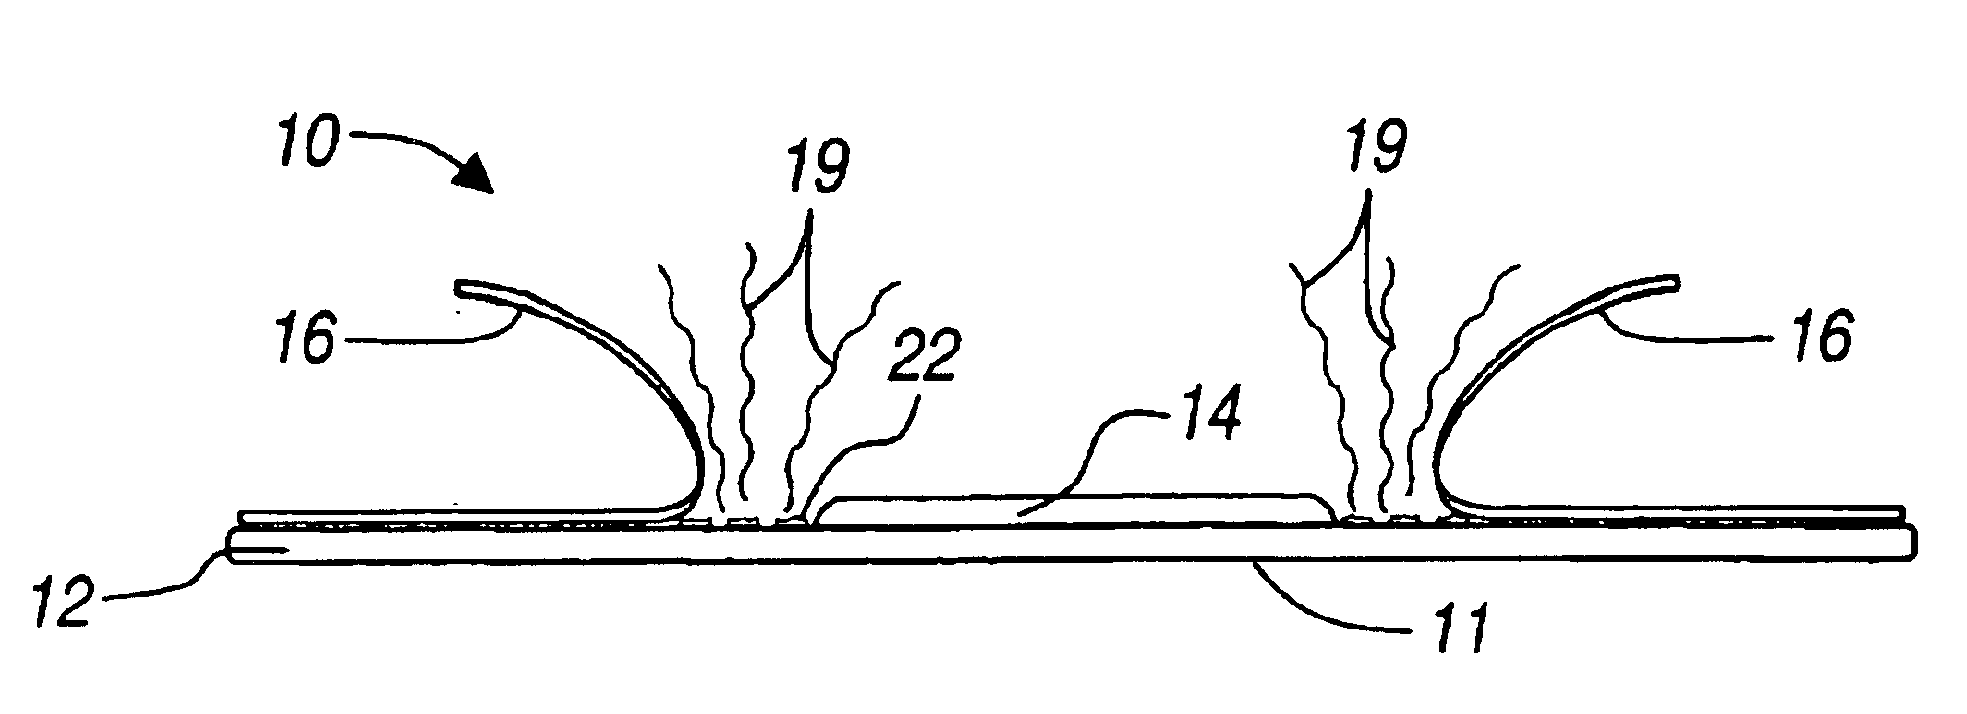 Method for forming a scented adhesive bandage